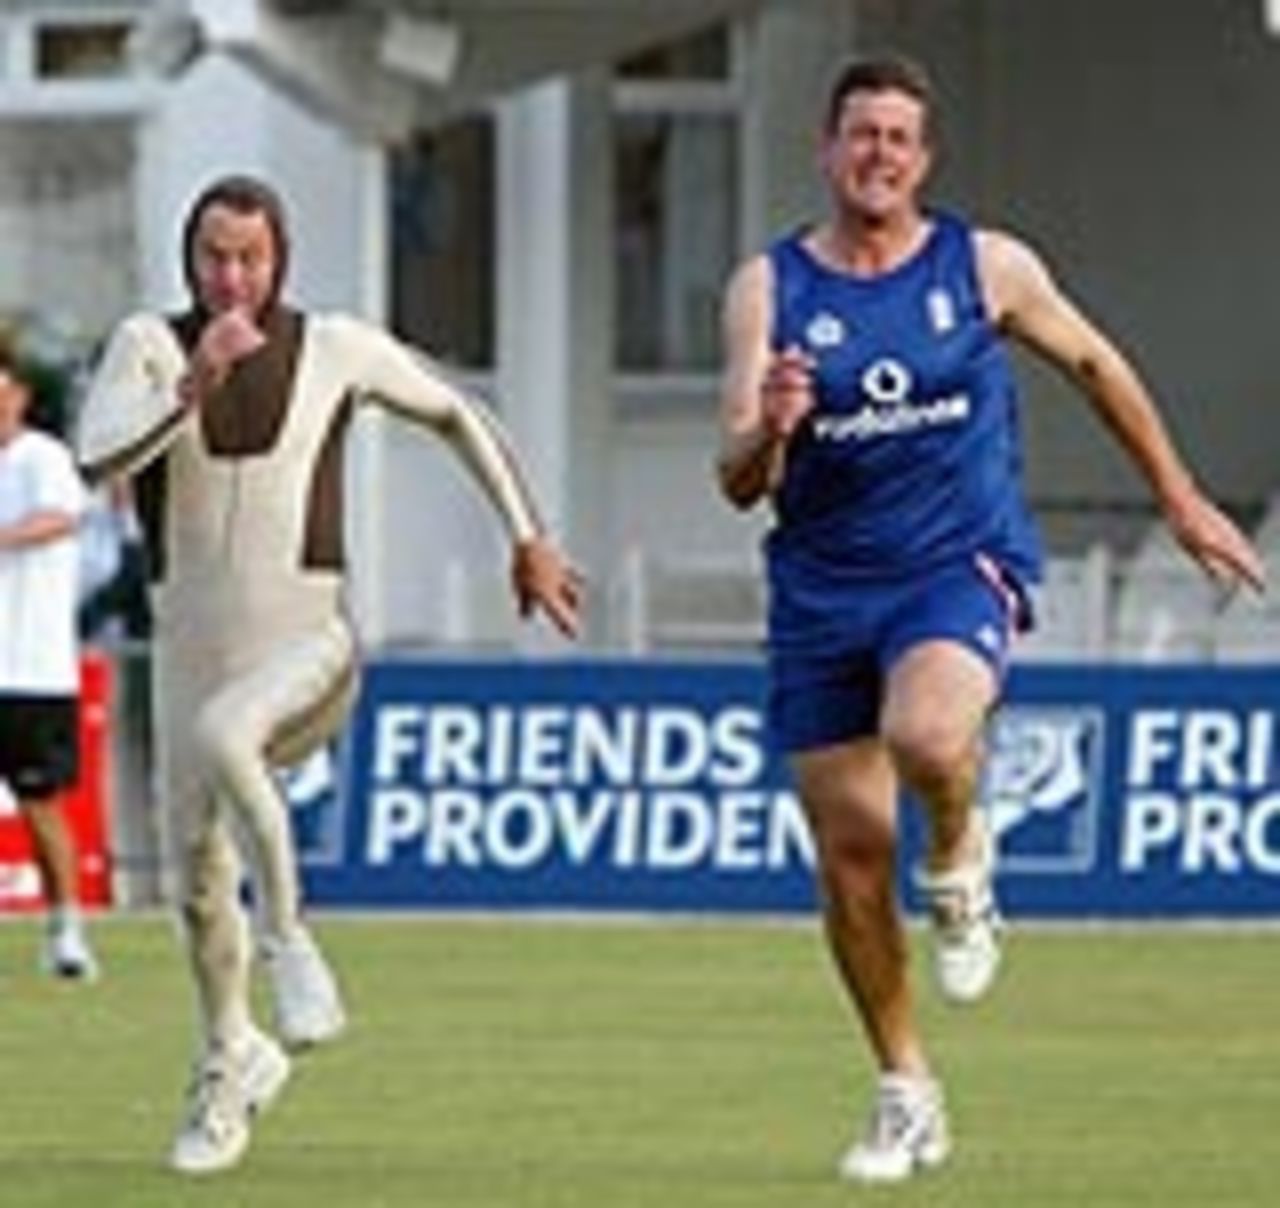 Ashley Giles and Mark Richardson in a sprint-out